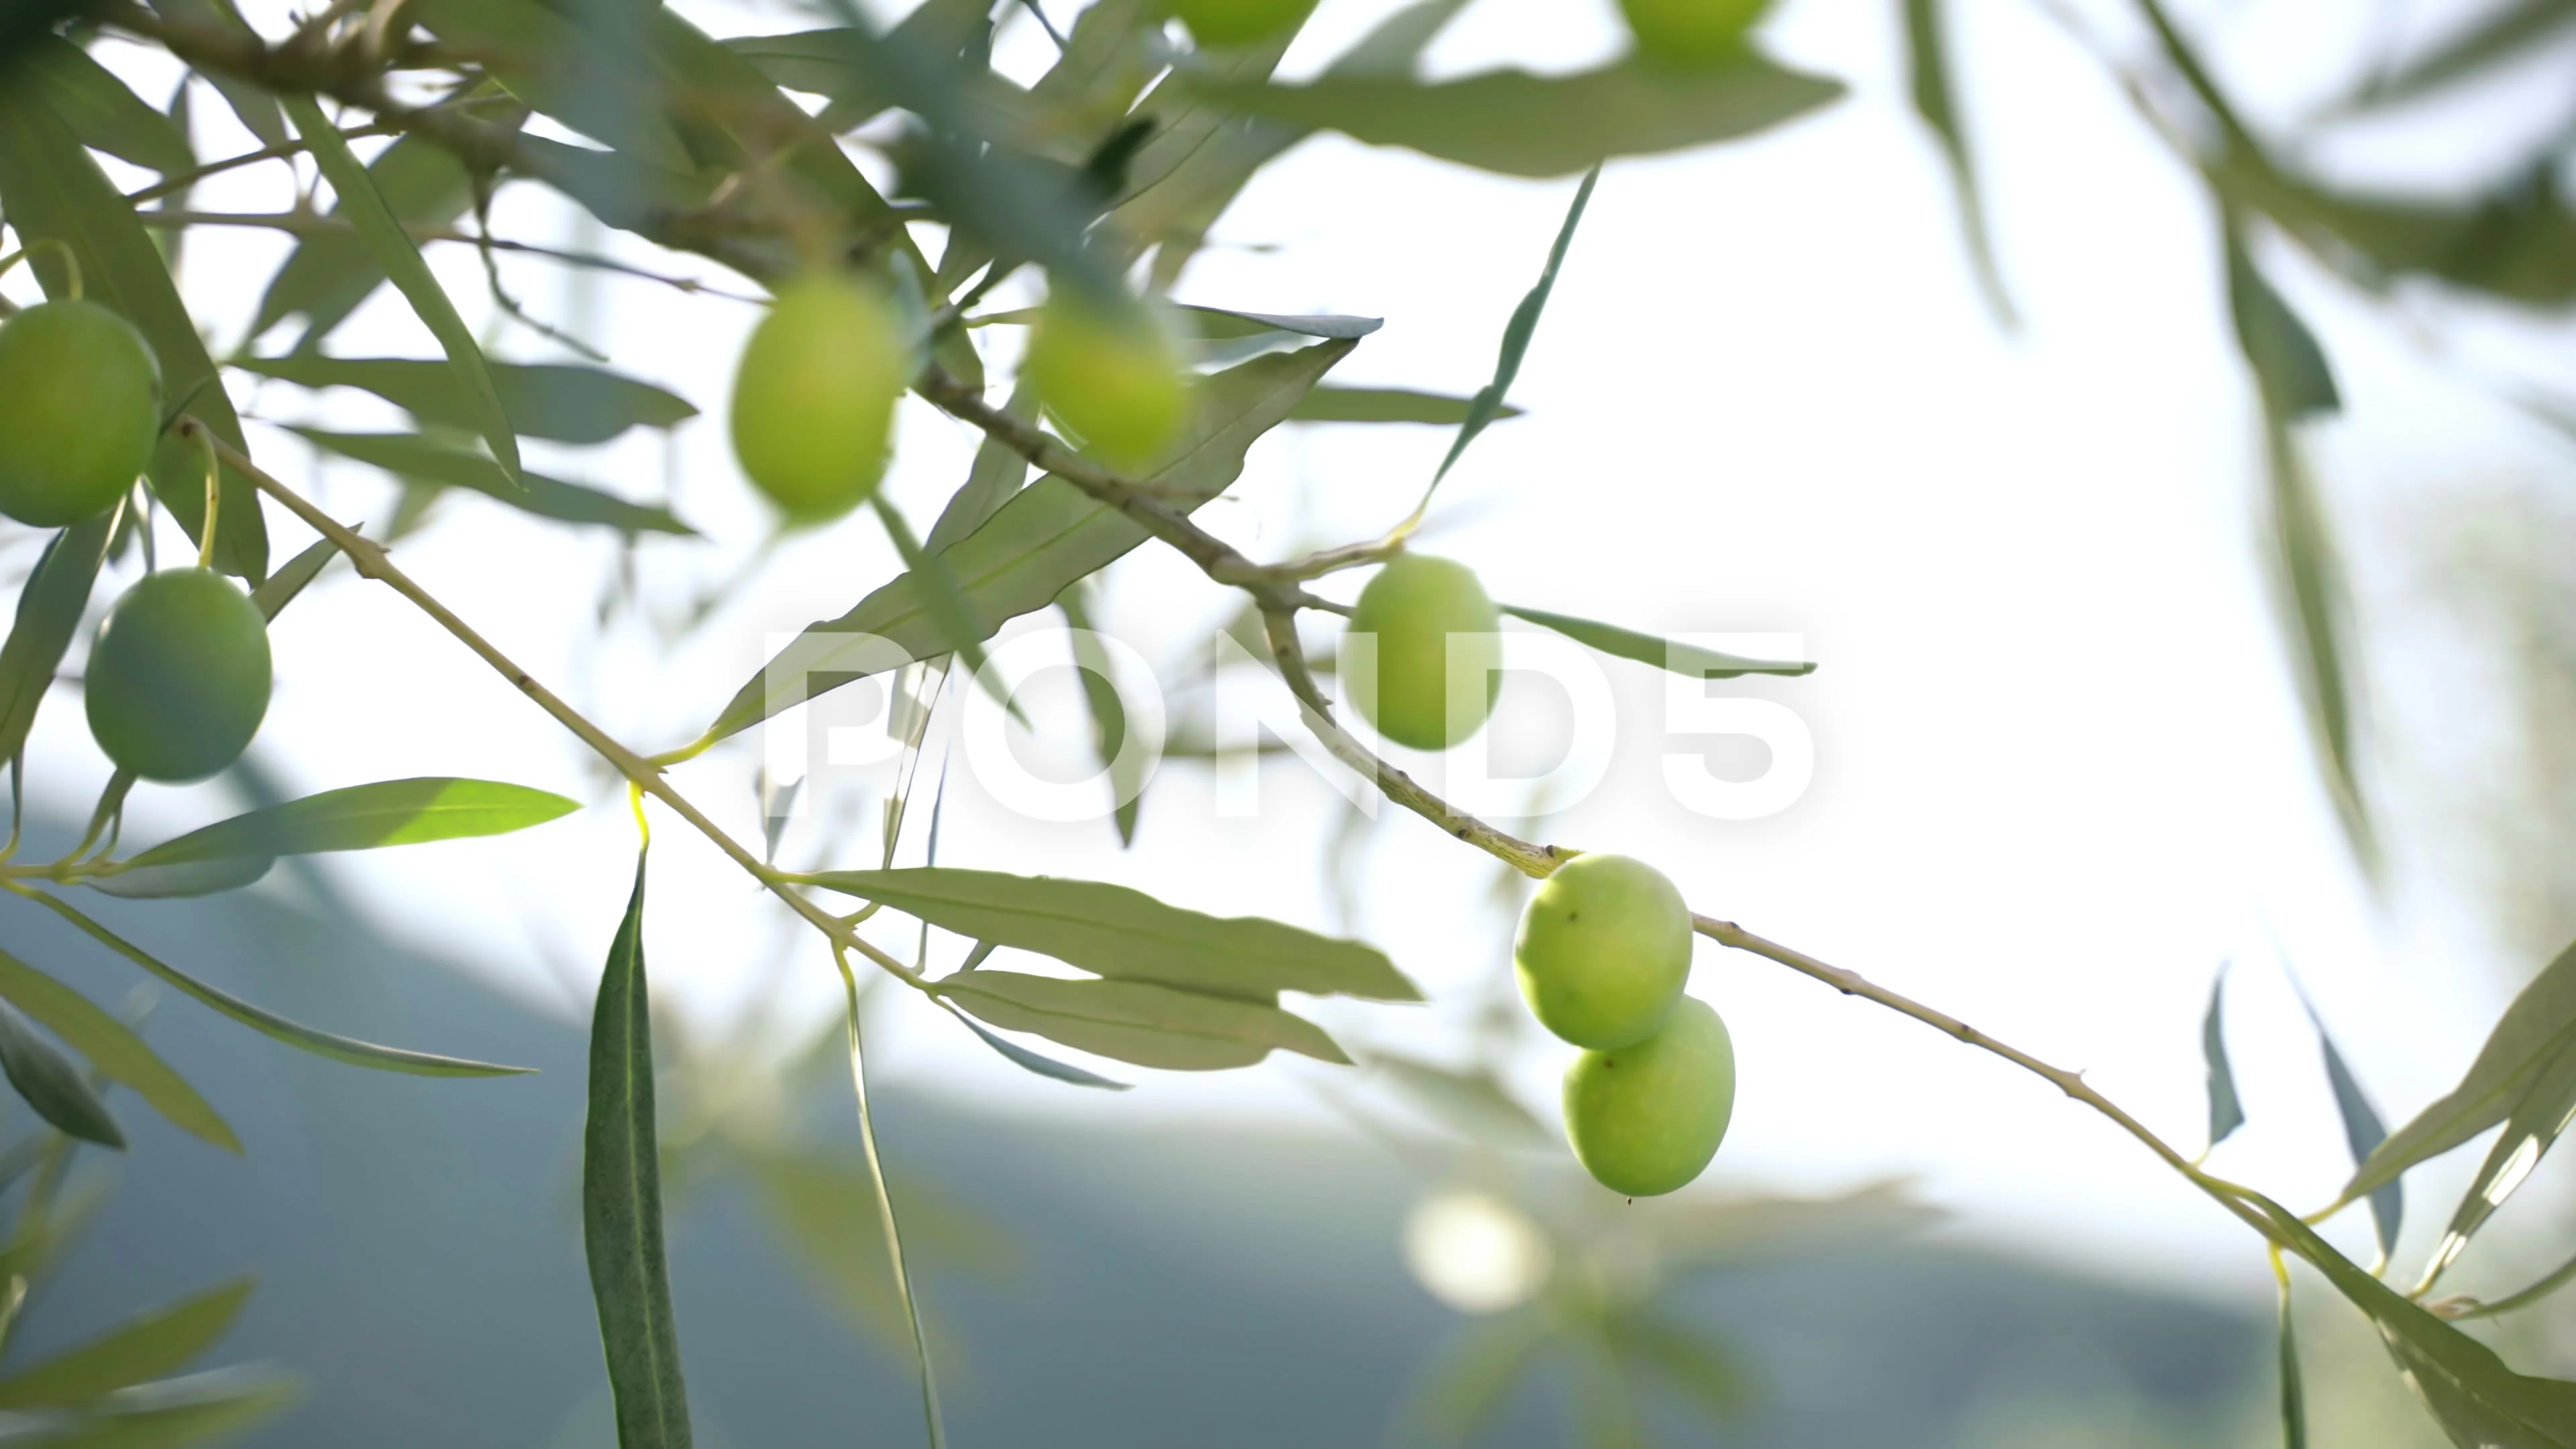 Olive Tree Branch with Ripe Olives